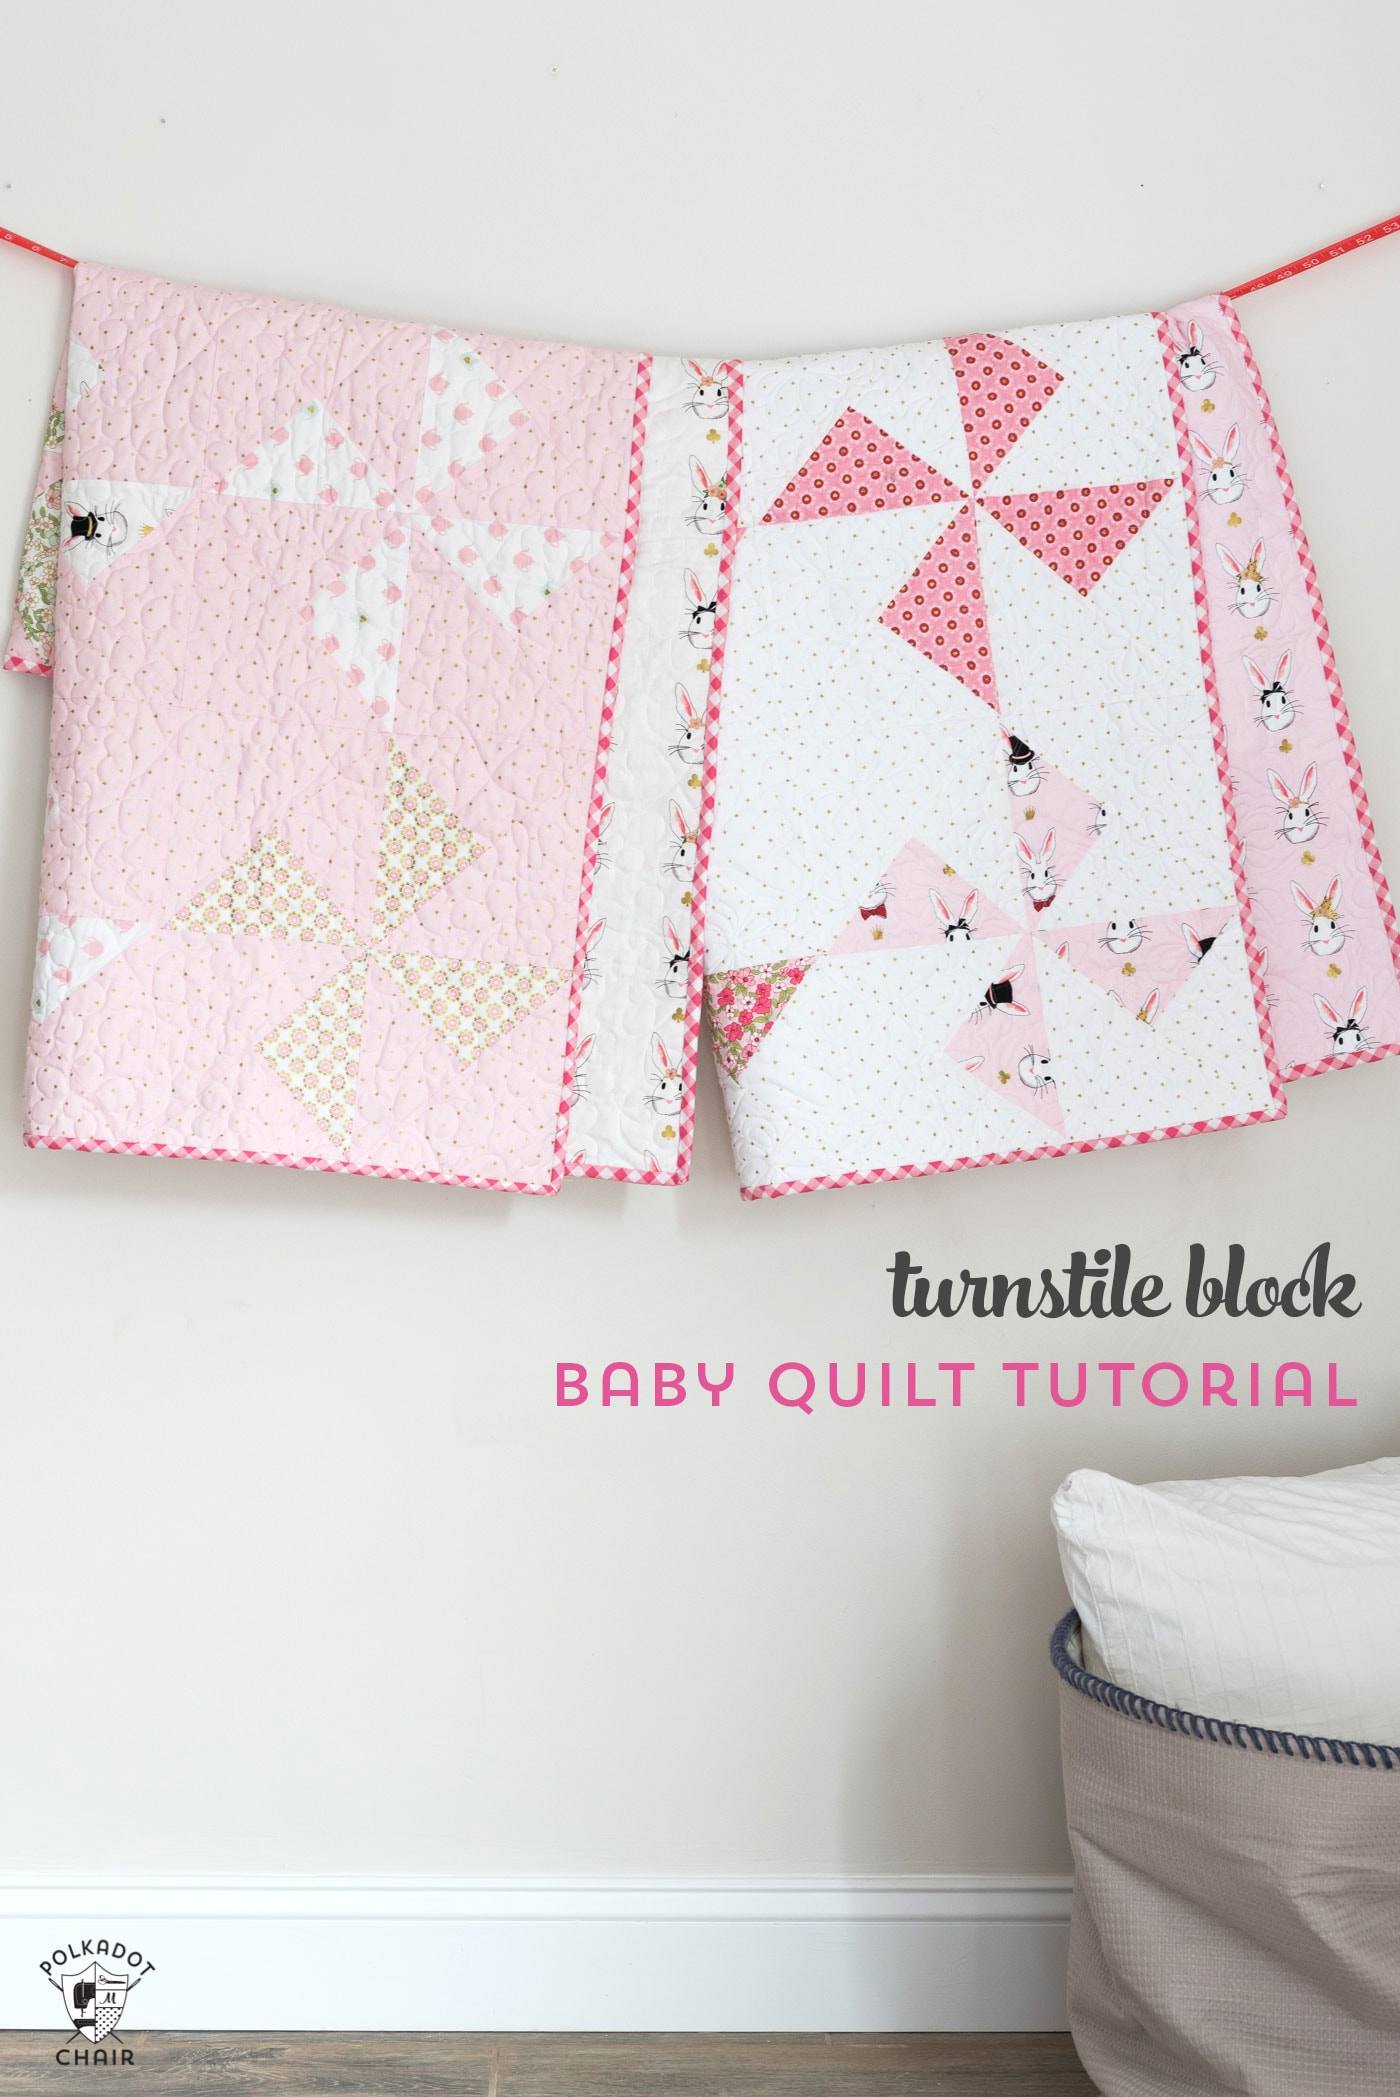 Baby Quilt Embroidery Patterns Free Ba Quilt Patterns Featuring Simple Turnstile Quilt Blocks